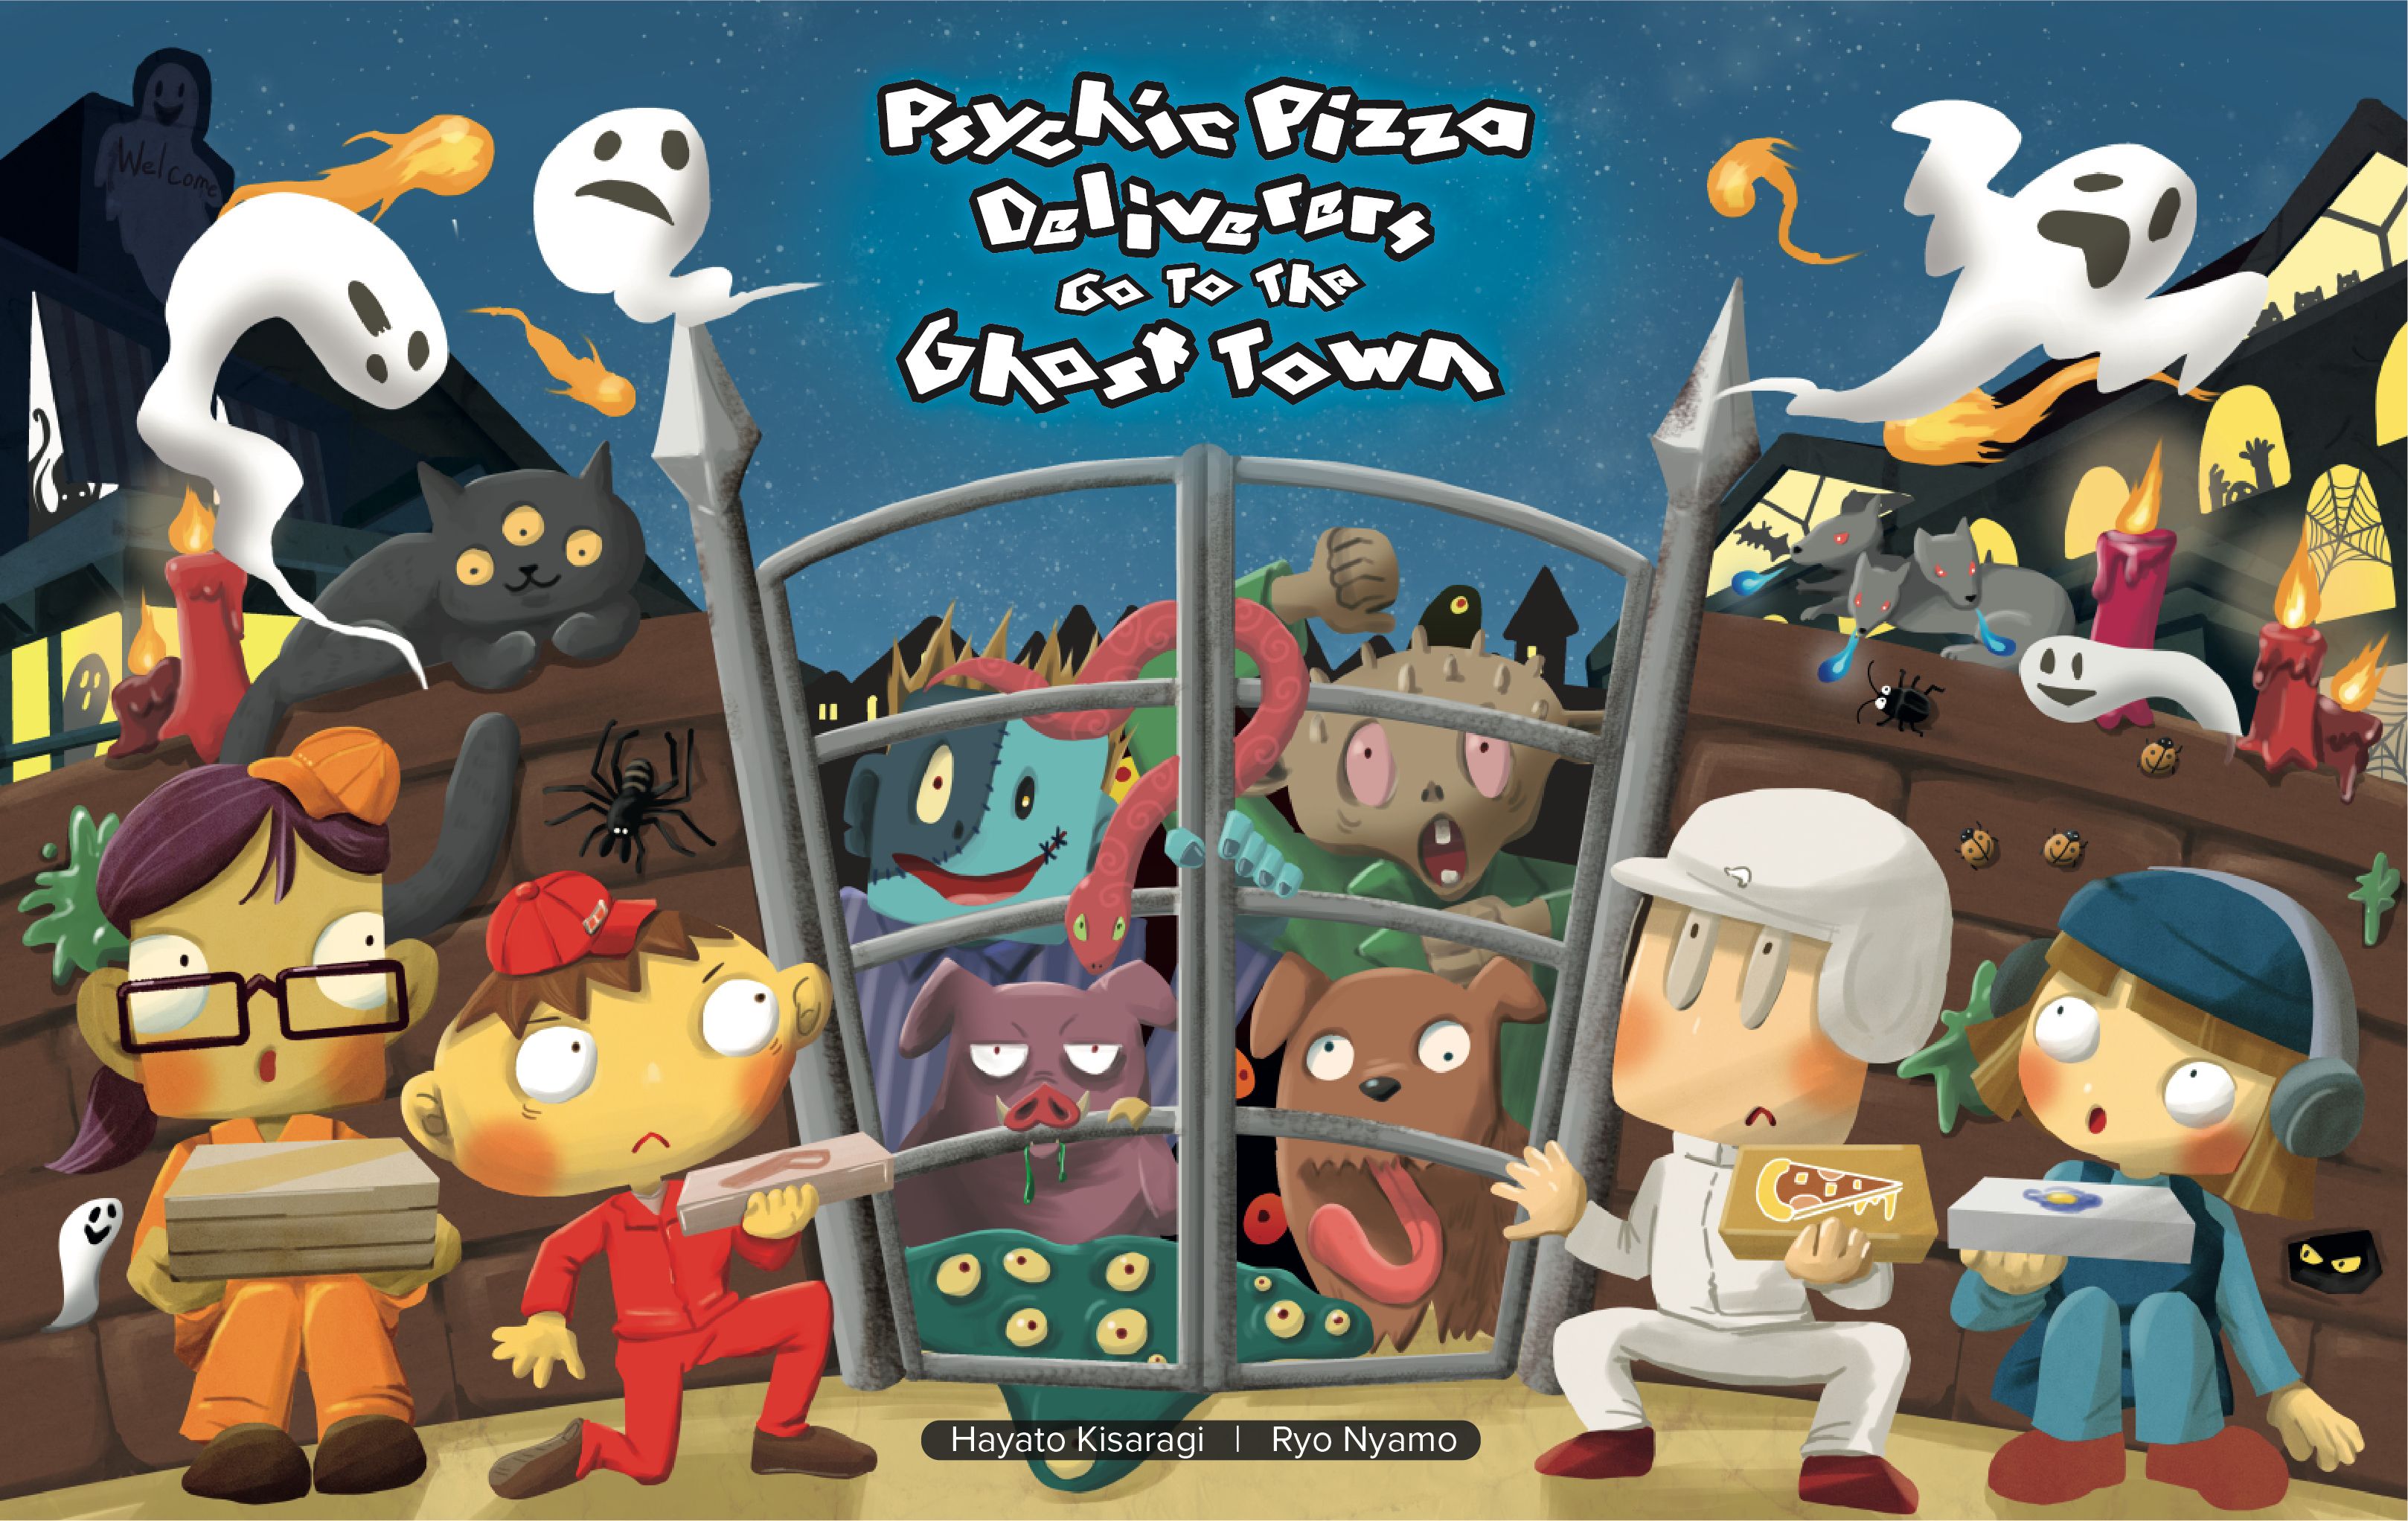 Allplay Psychic Pizza Deliverers Go to the Ghost Town